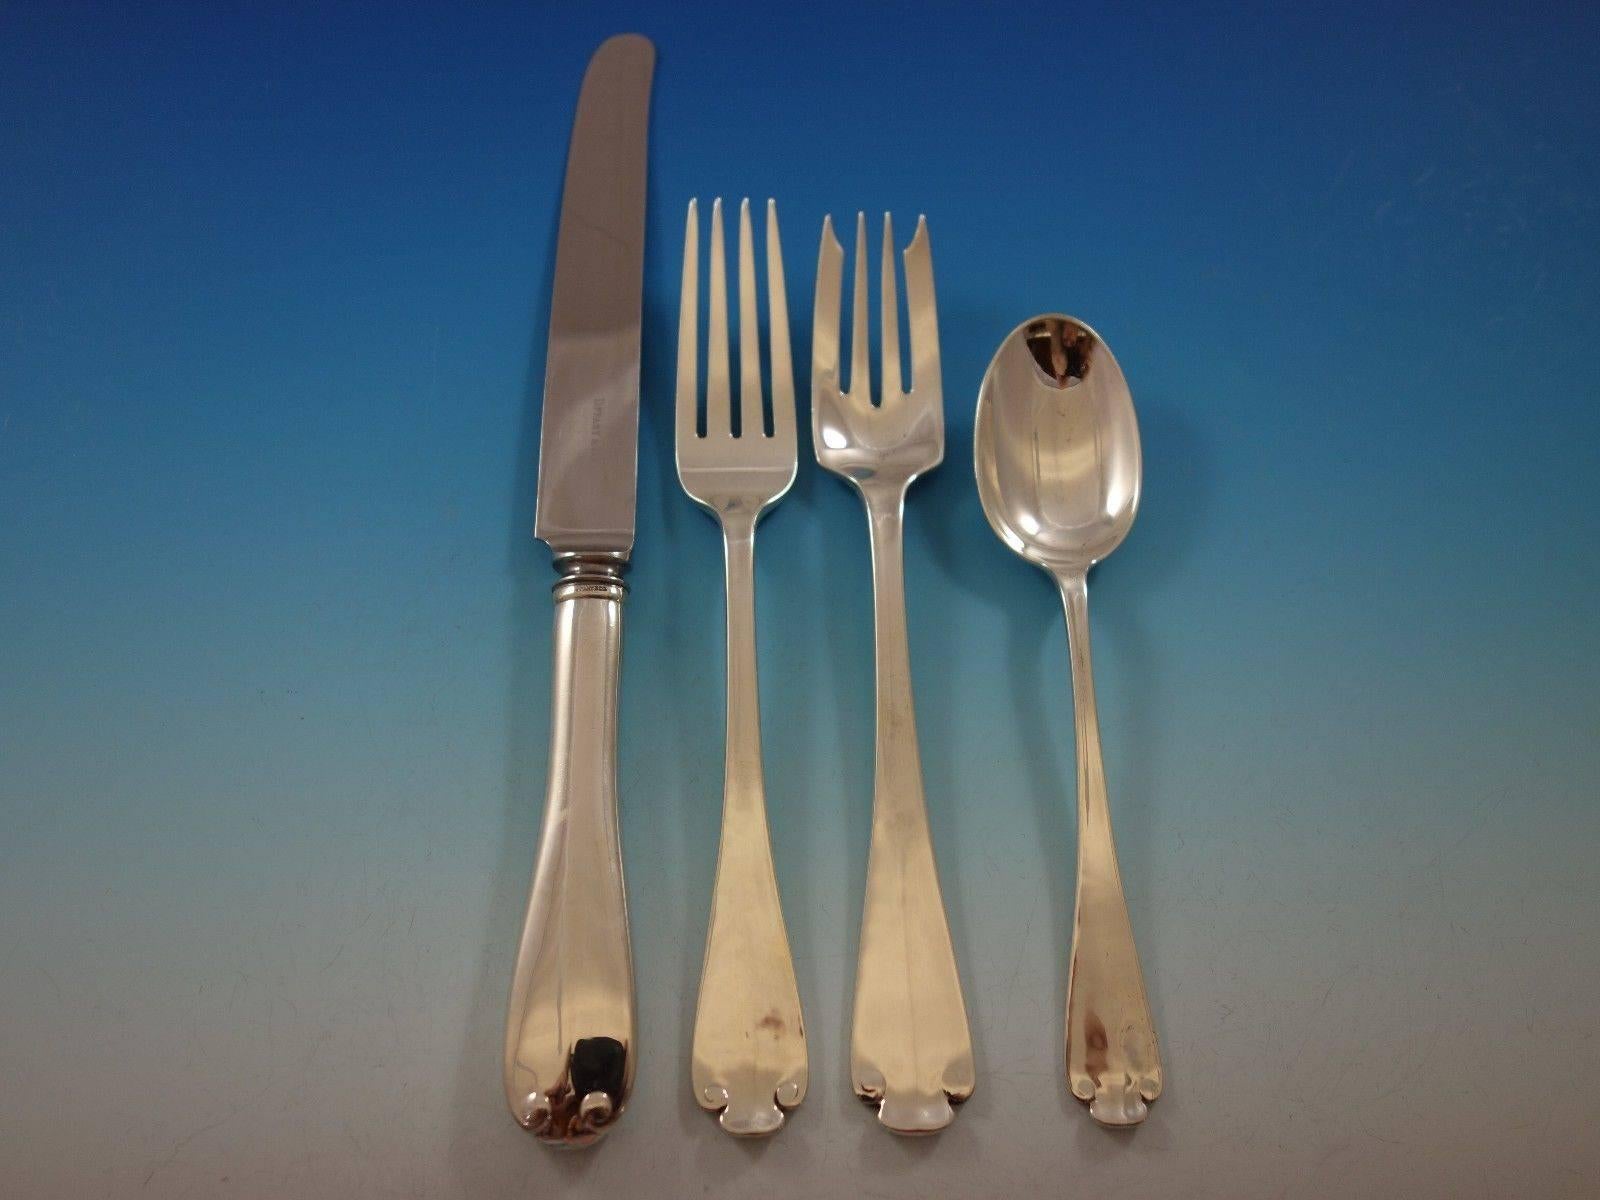 Flemish by Tiffany & CO. sterling silver flatware set - 51 pieces. This set includes: 

12 knives, 9 1/4